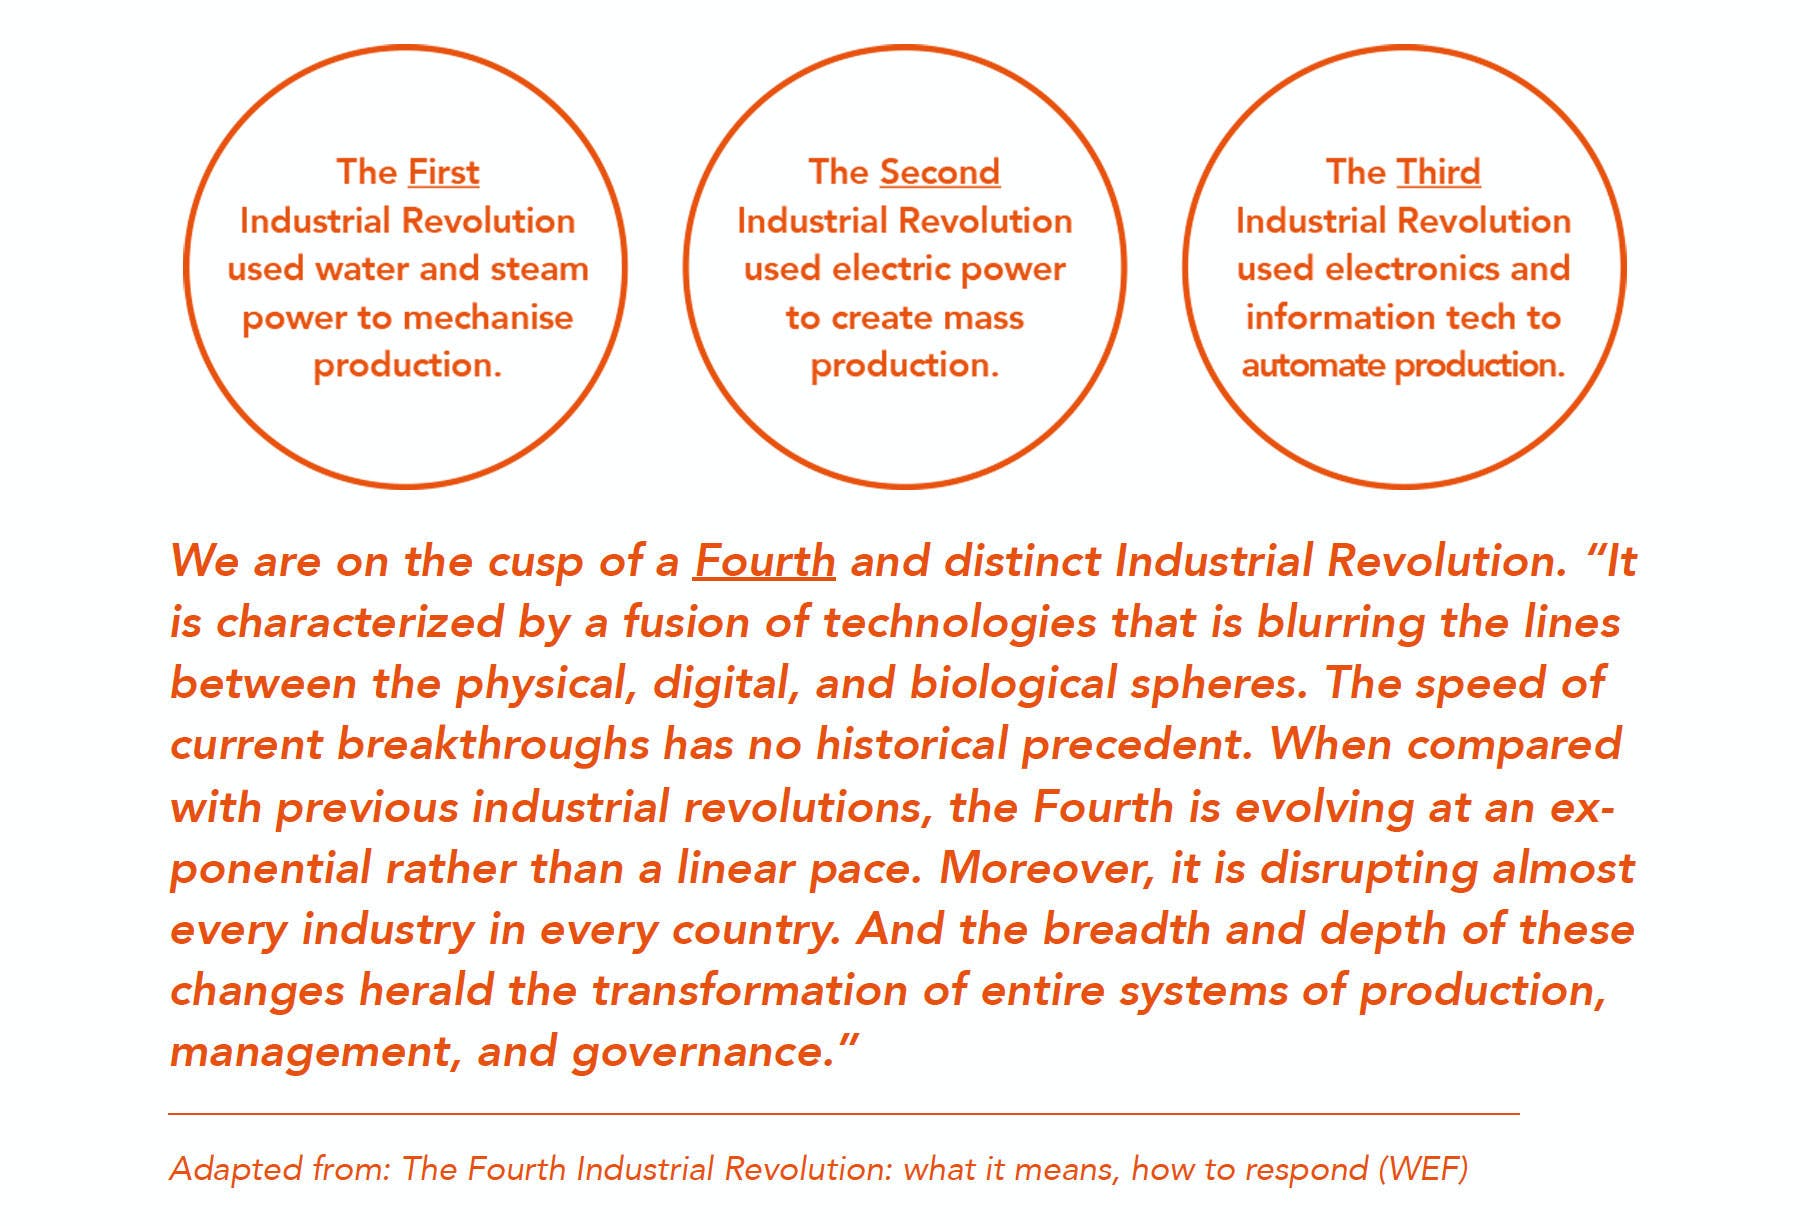 The 4th industrial revolution